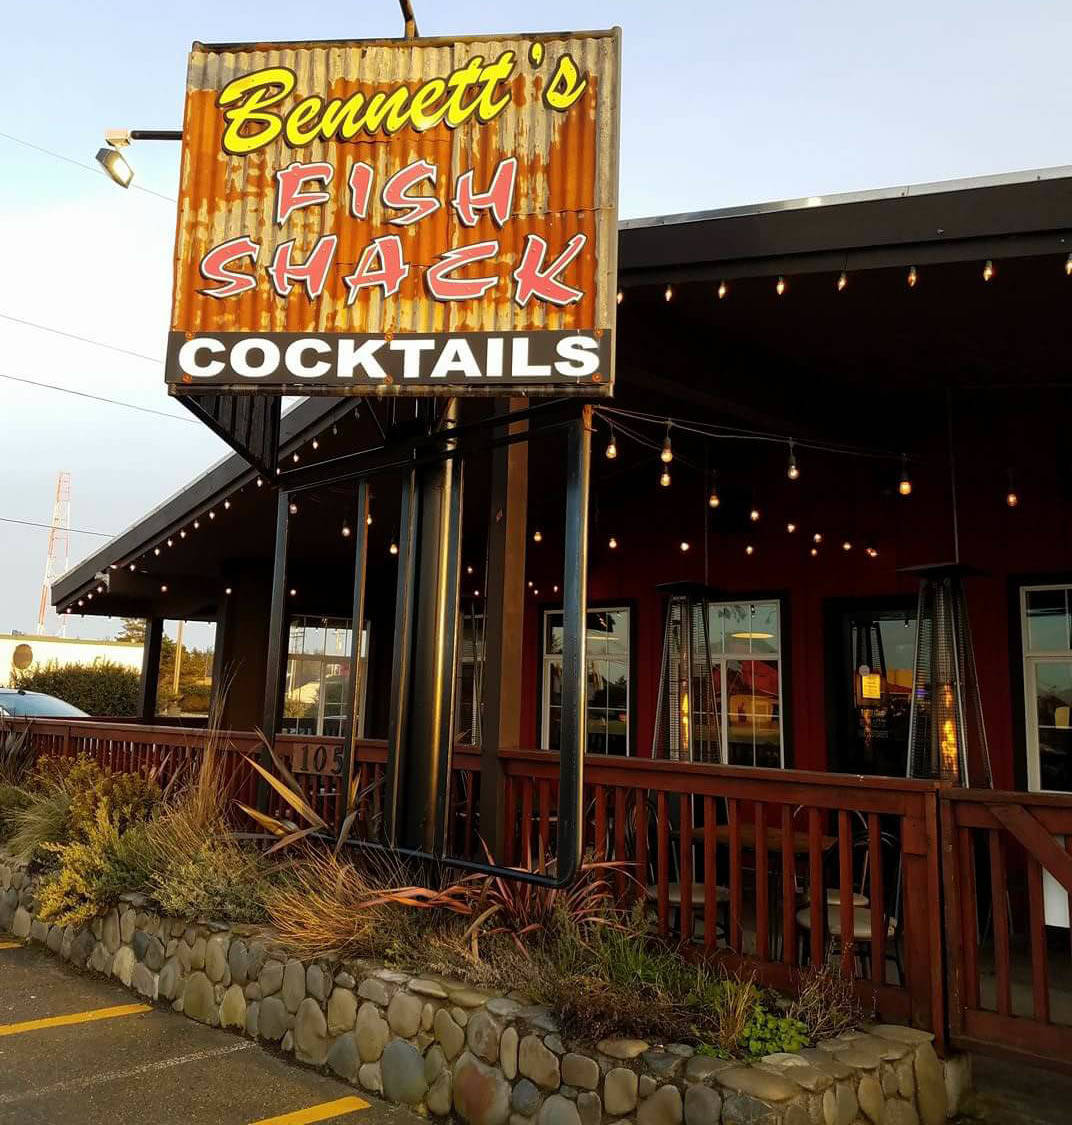 A popular choice for seafood lovers, grabbing a bite at Bennett’s Fish Shack is a great way to feel like you’ve escaped without having to go far.